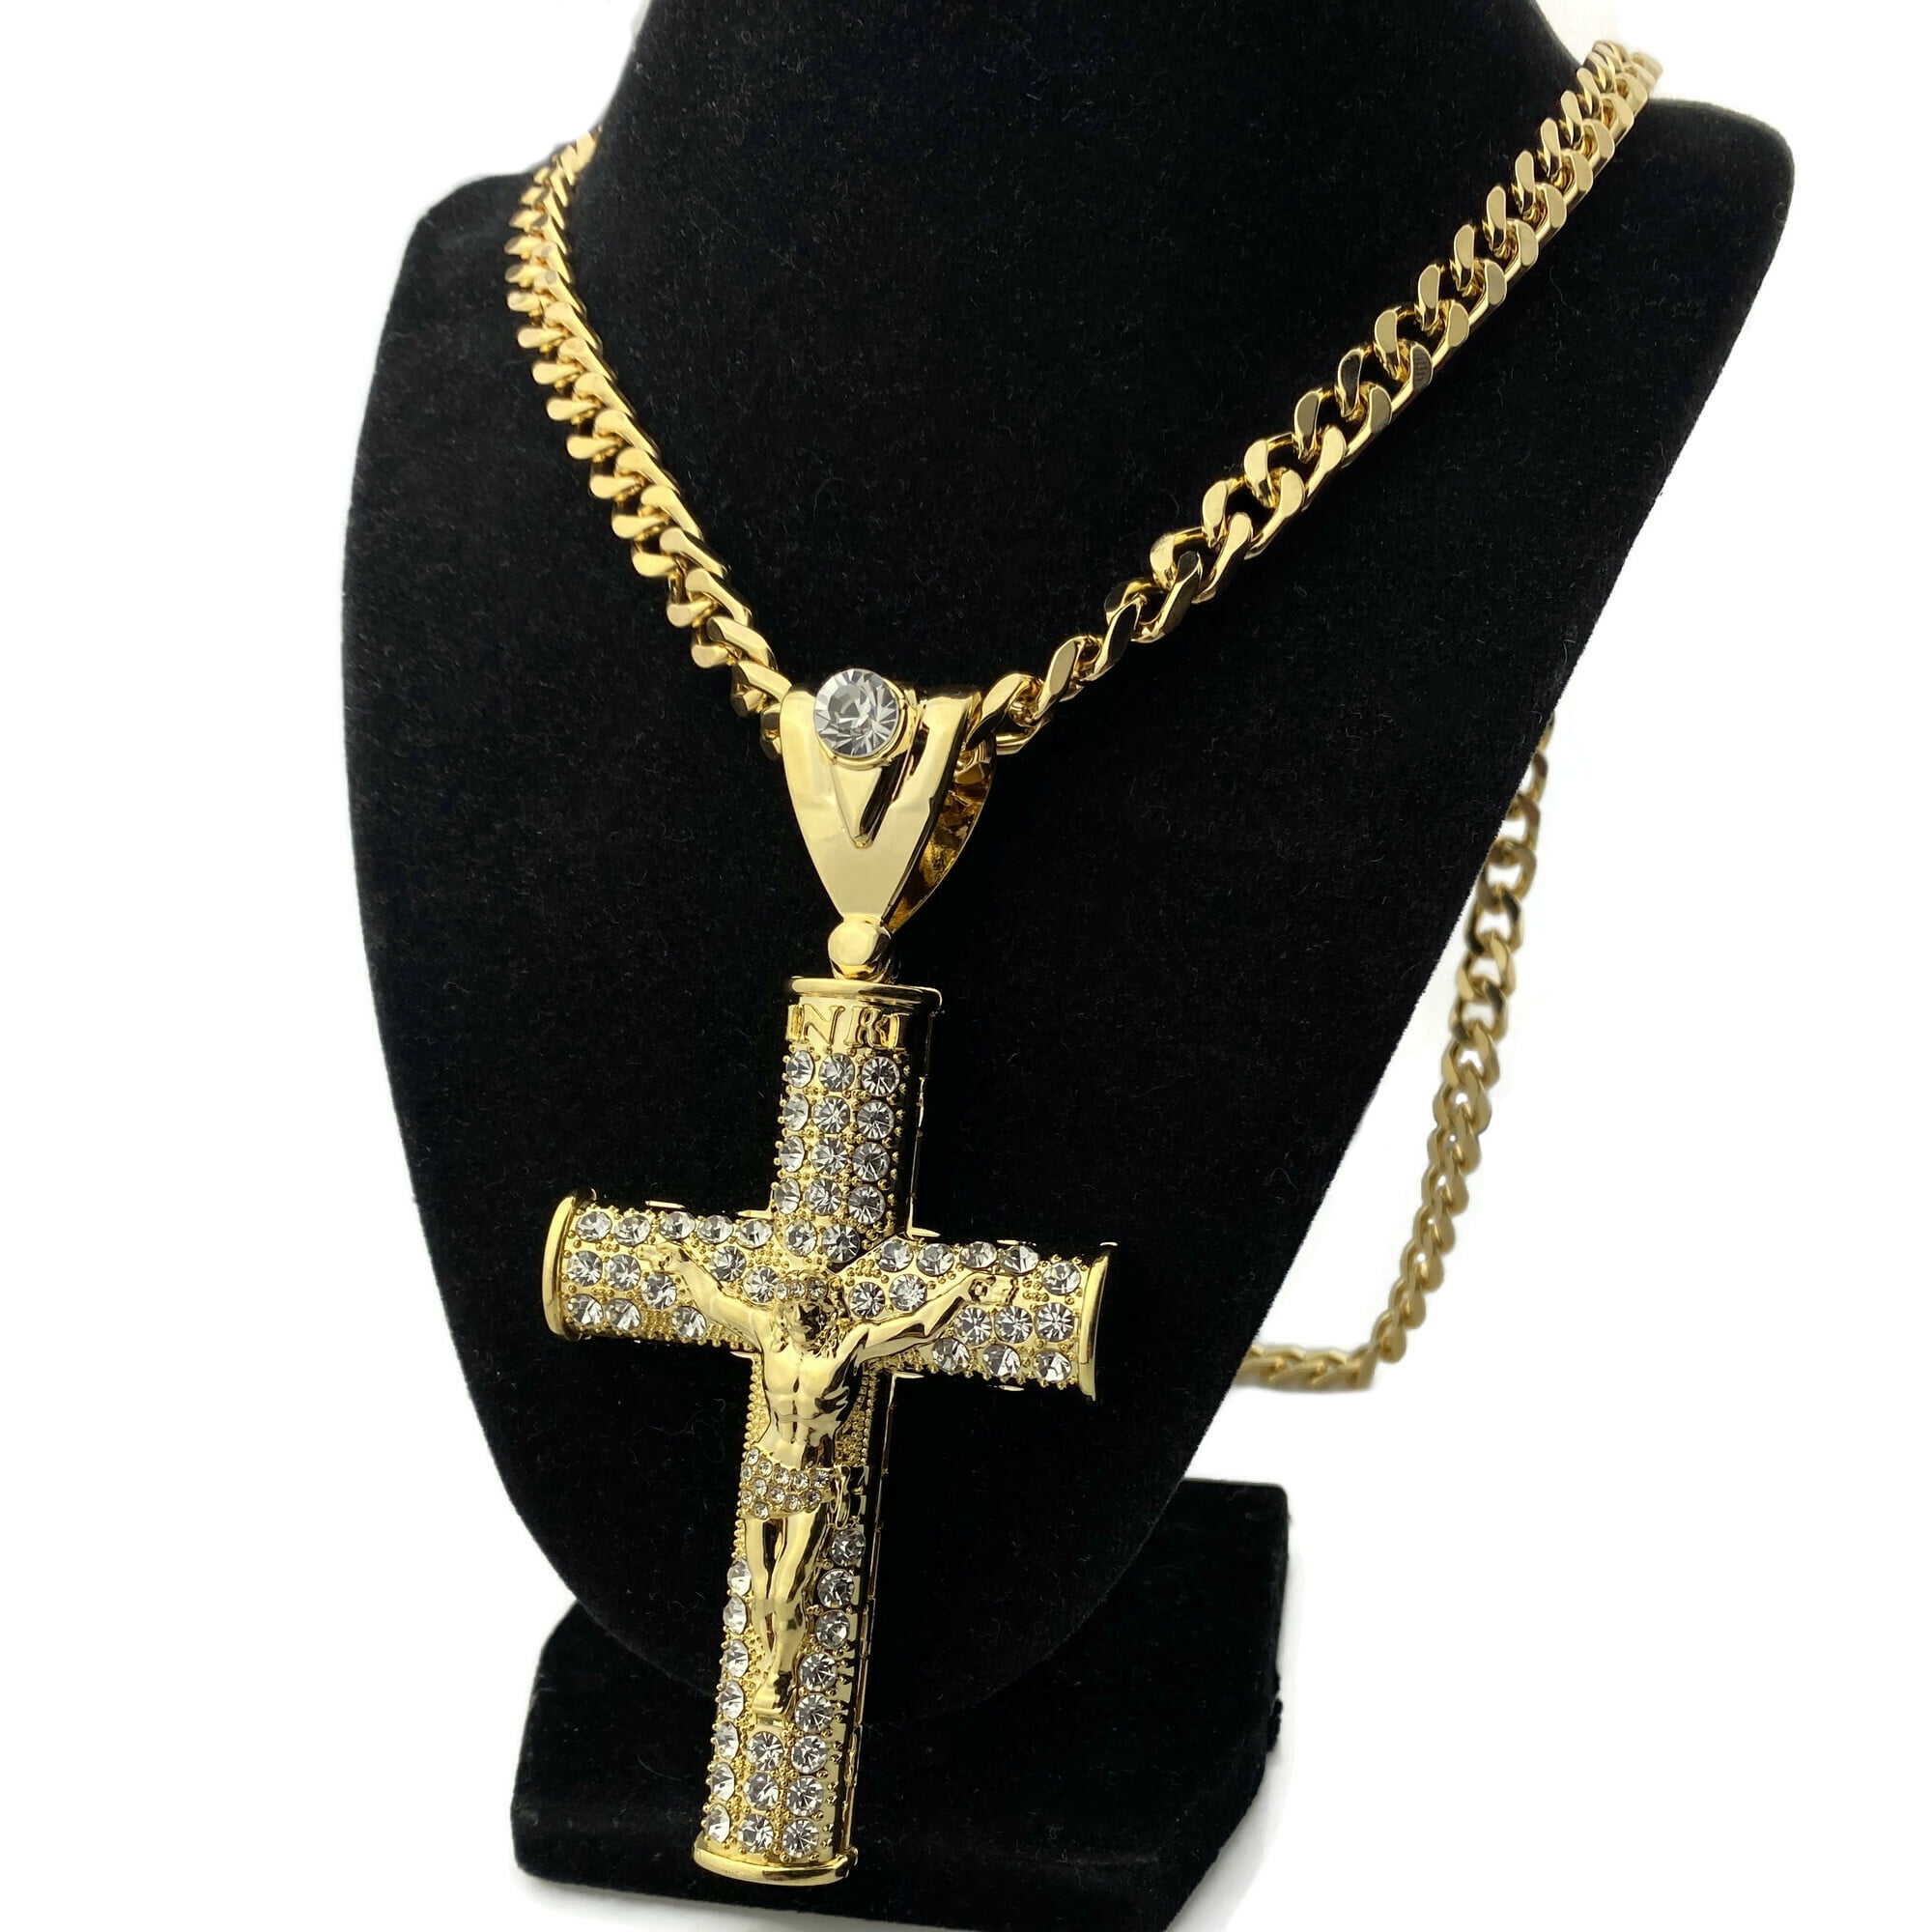 Heavy Jesus Chain Solid Chunky Pendant Gold Finish Hip Hop Cuban Necklace 30" In 